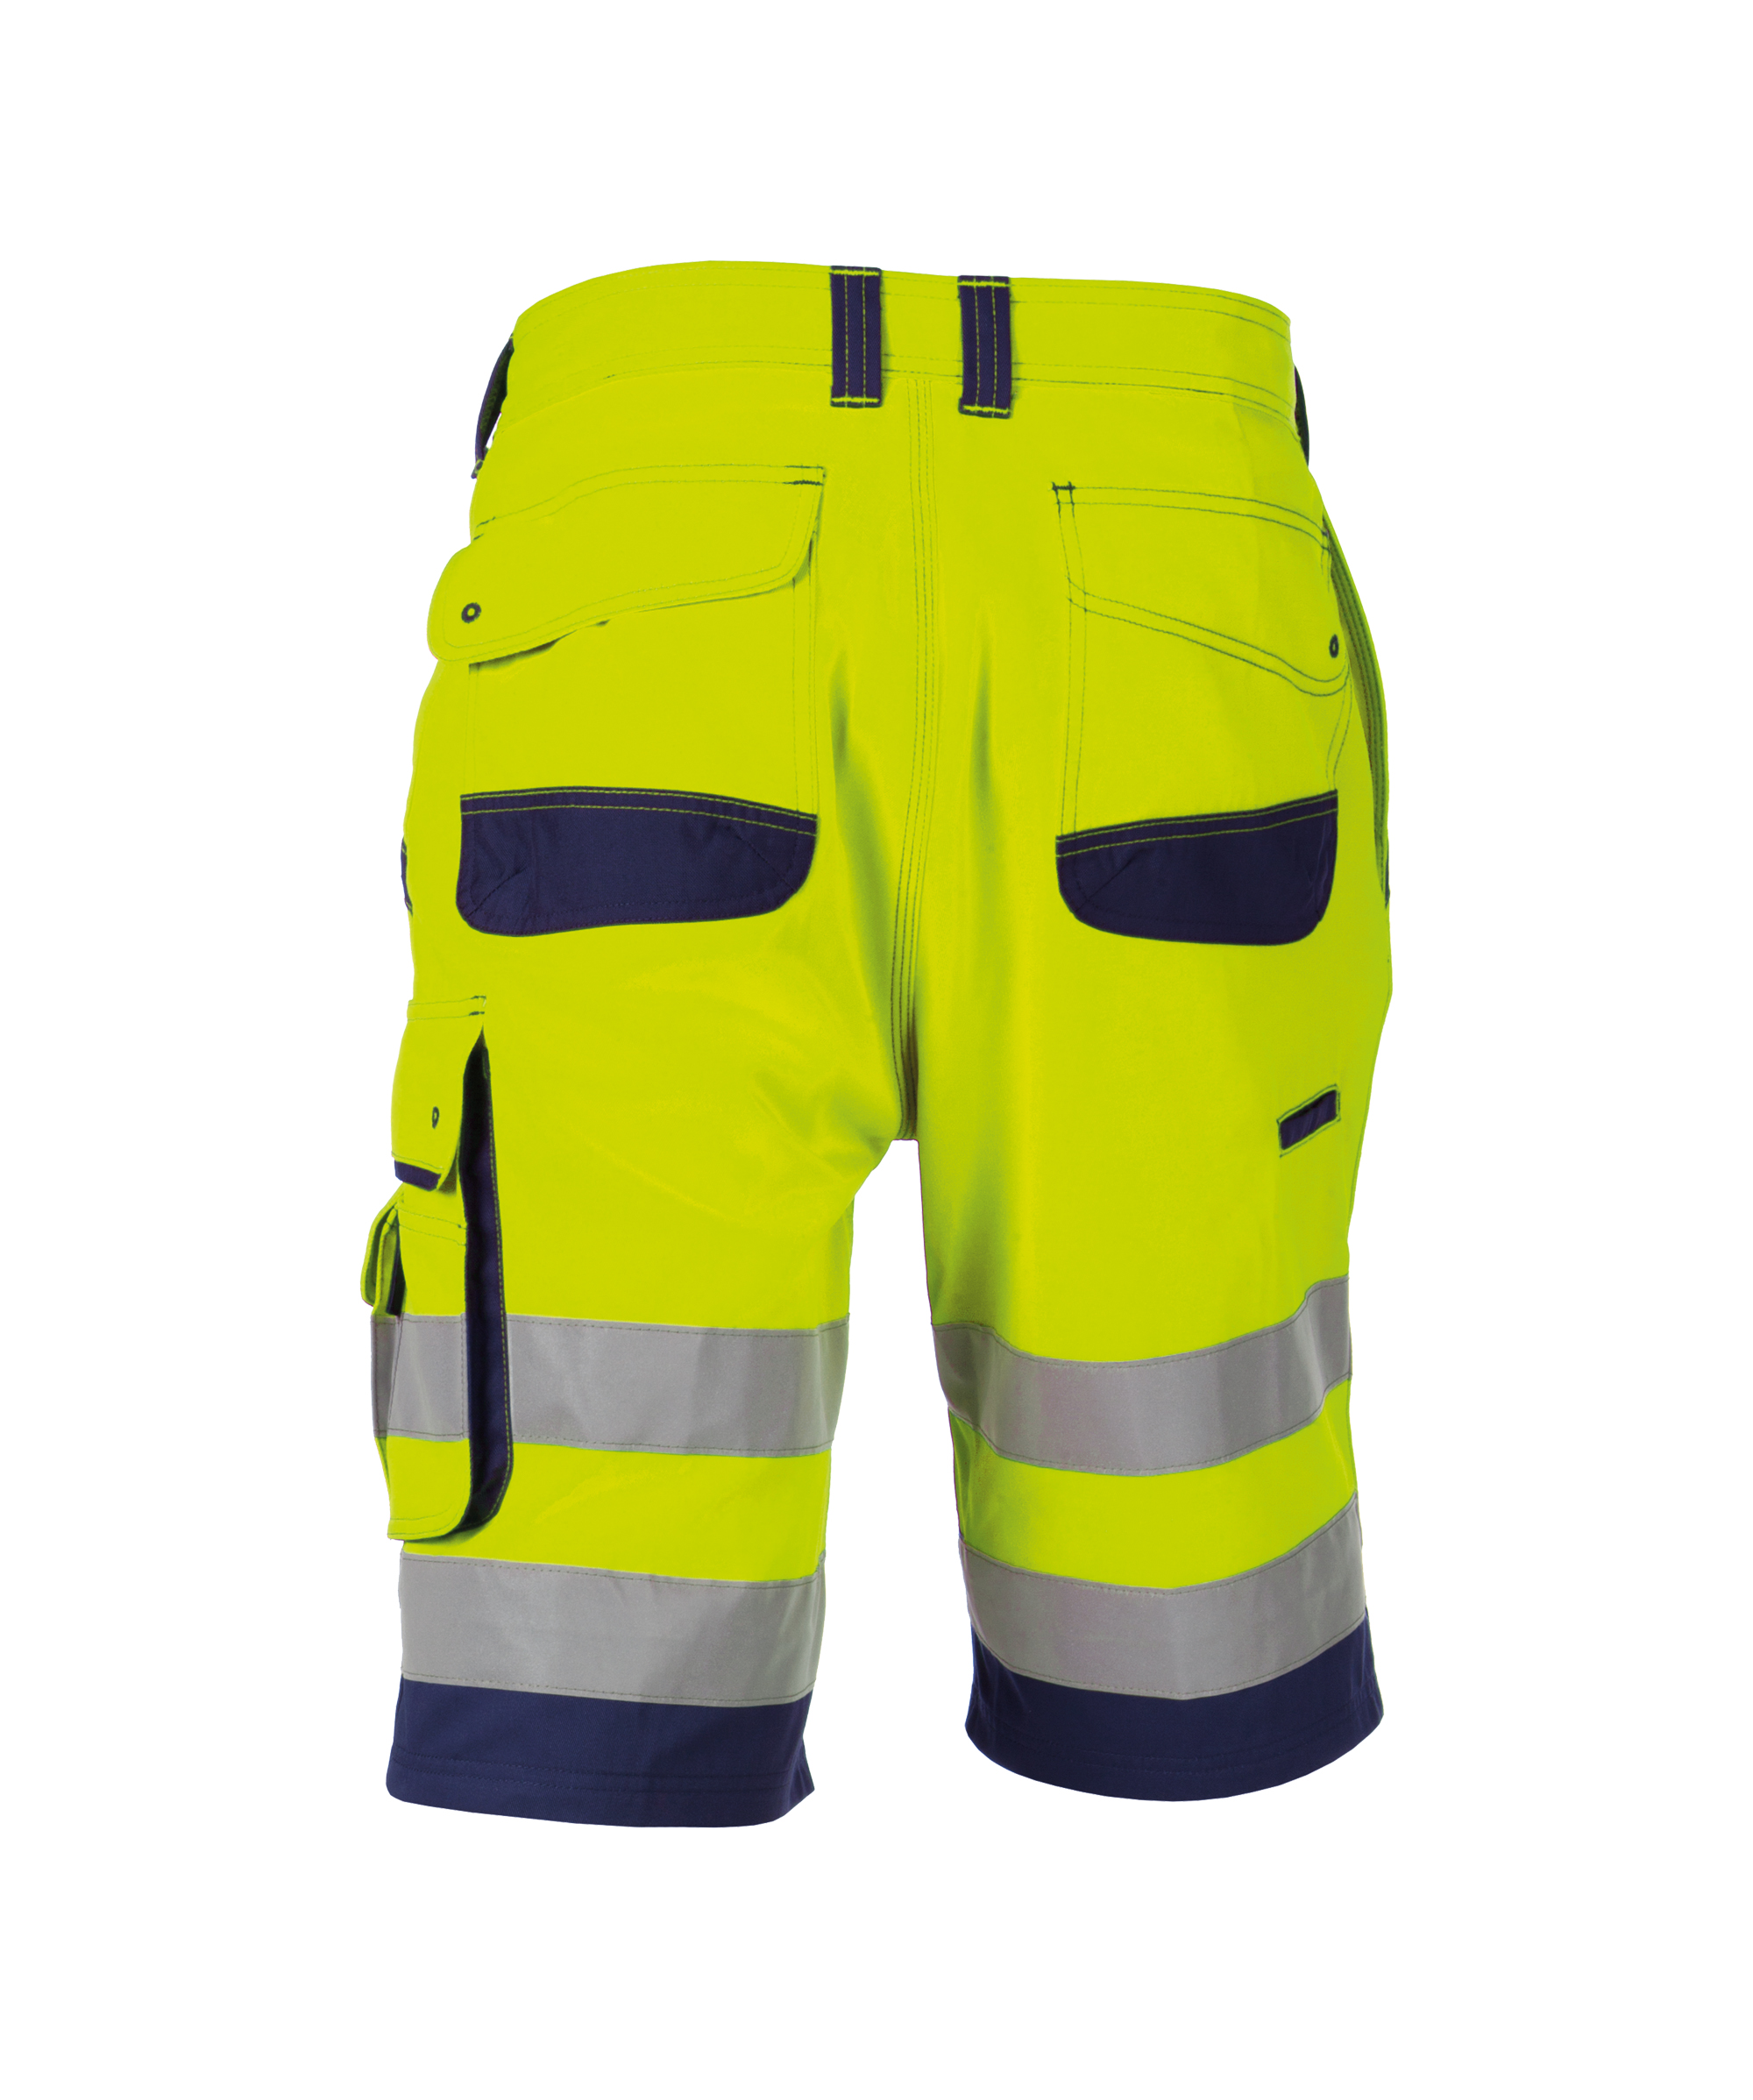 lucca_high-visibility-work-shorts_fluo-yellow-navy_back.jpg